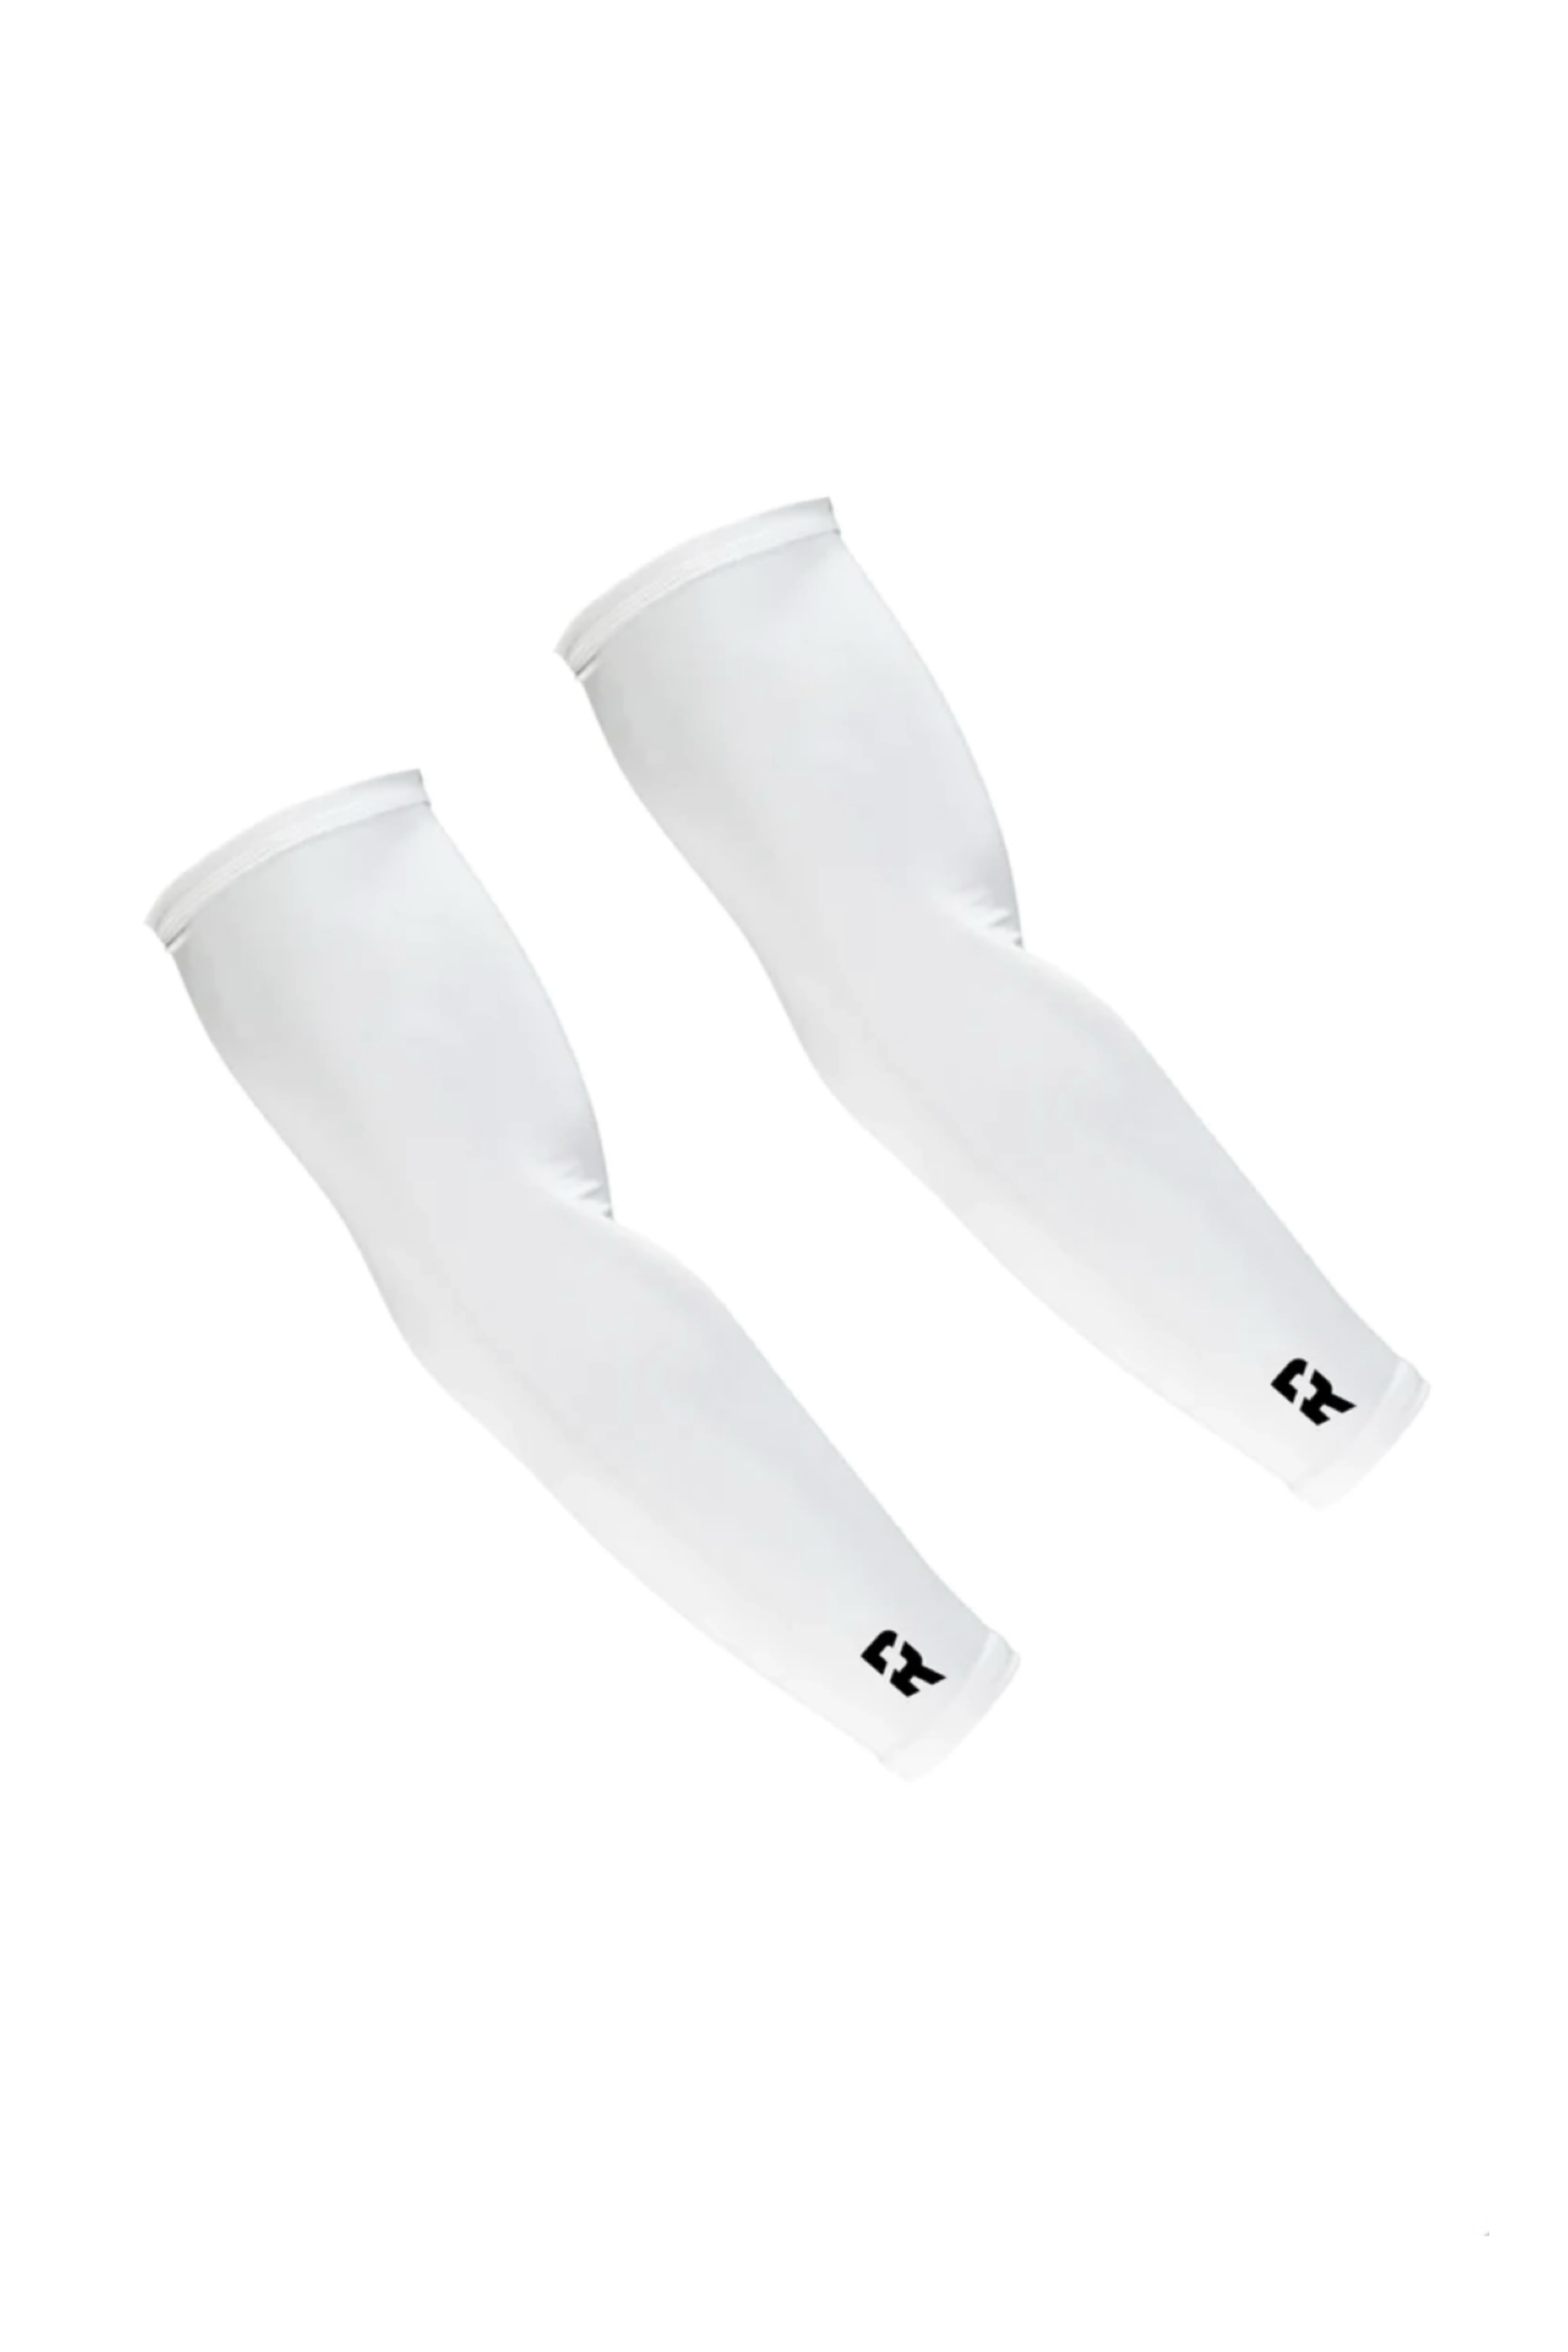 REFEND ARM SLEEVES WHITE (Pair) – Refend